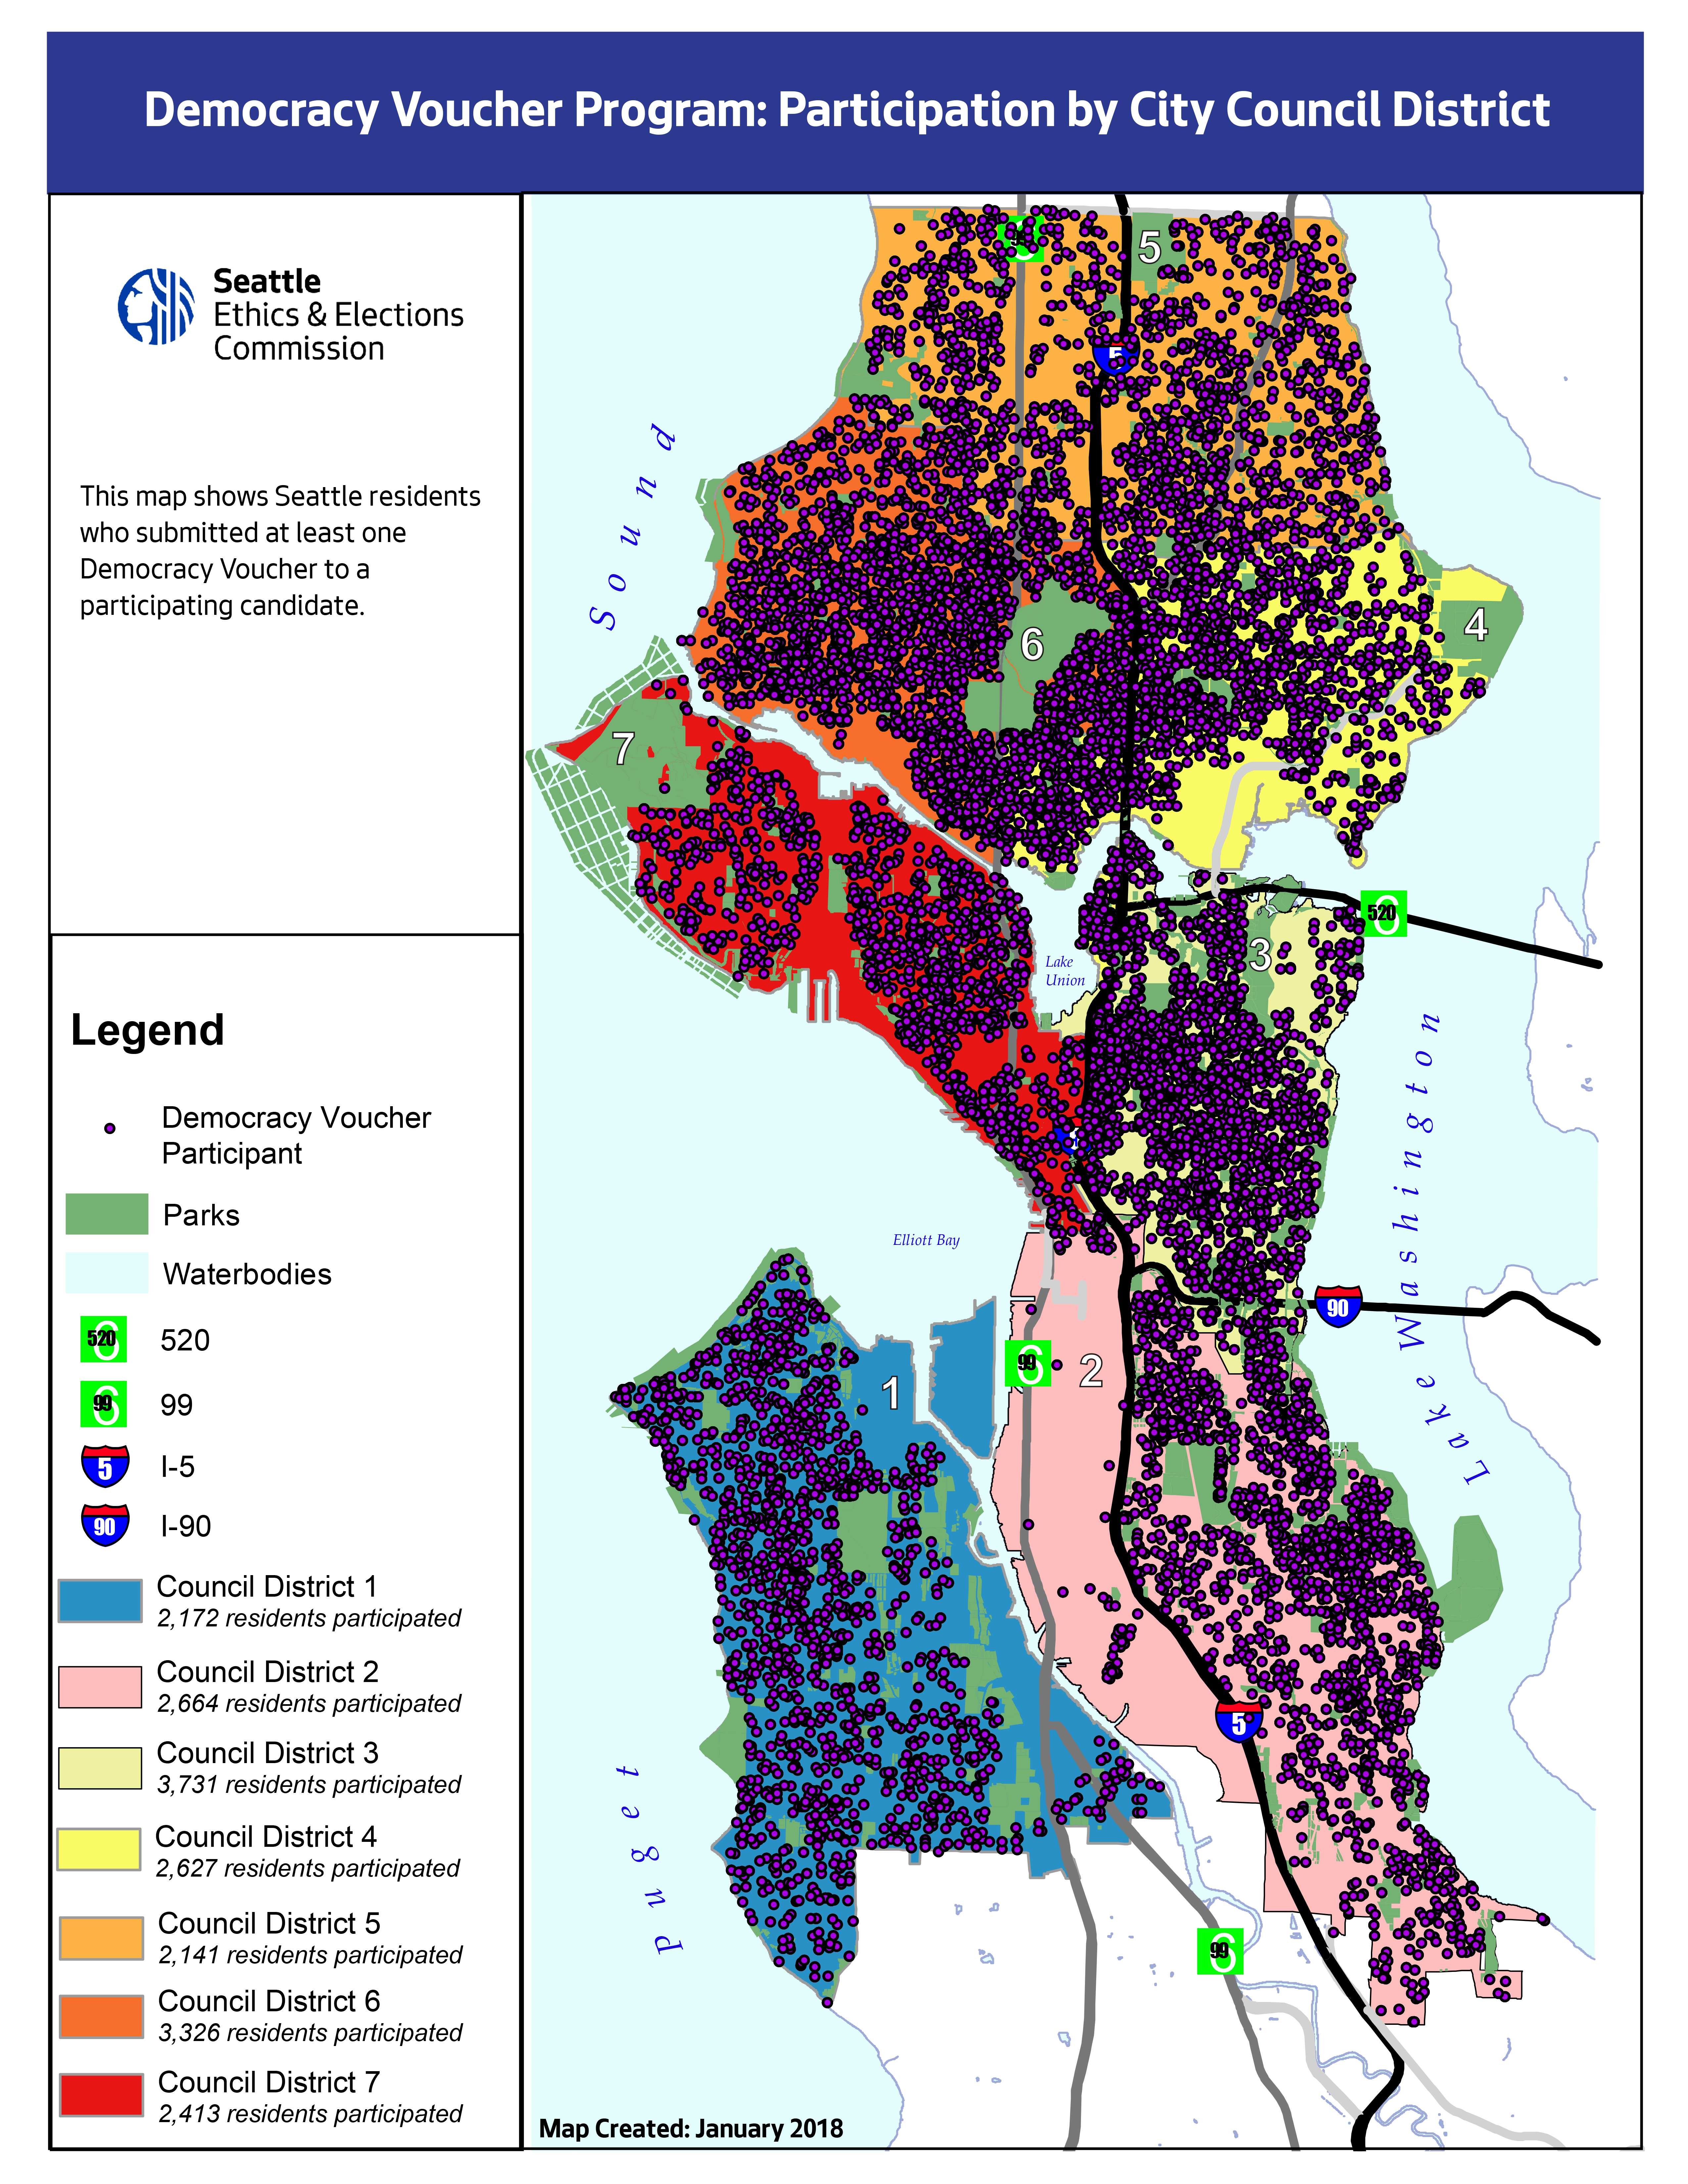 A map of Seattle showing participation in the Democracy Voucher Program by City Council Districts.